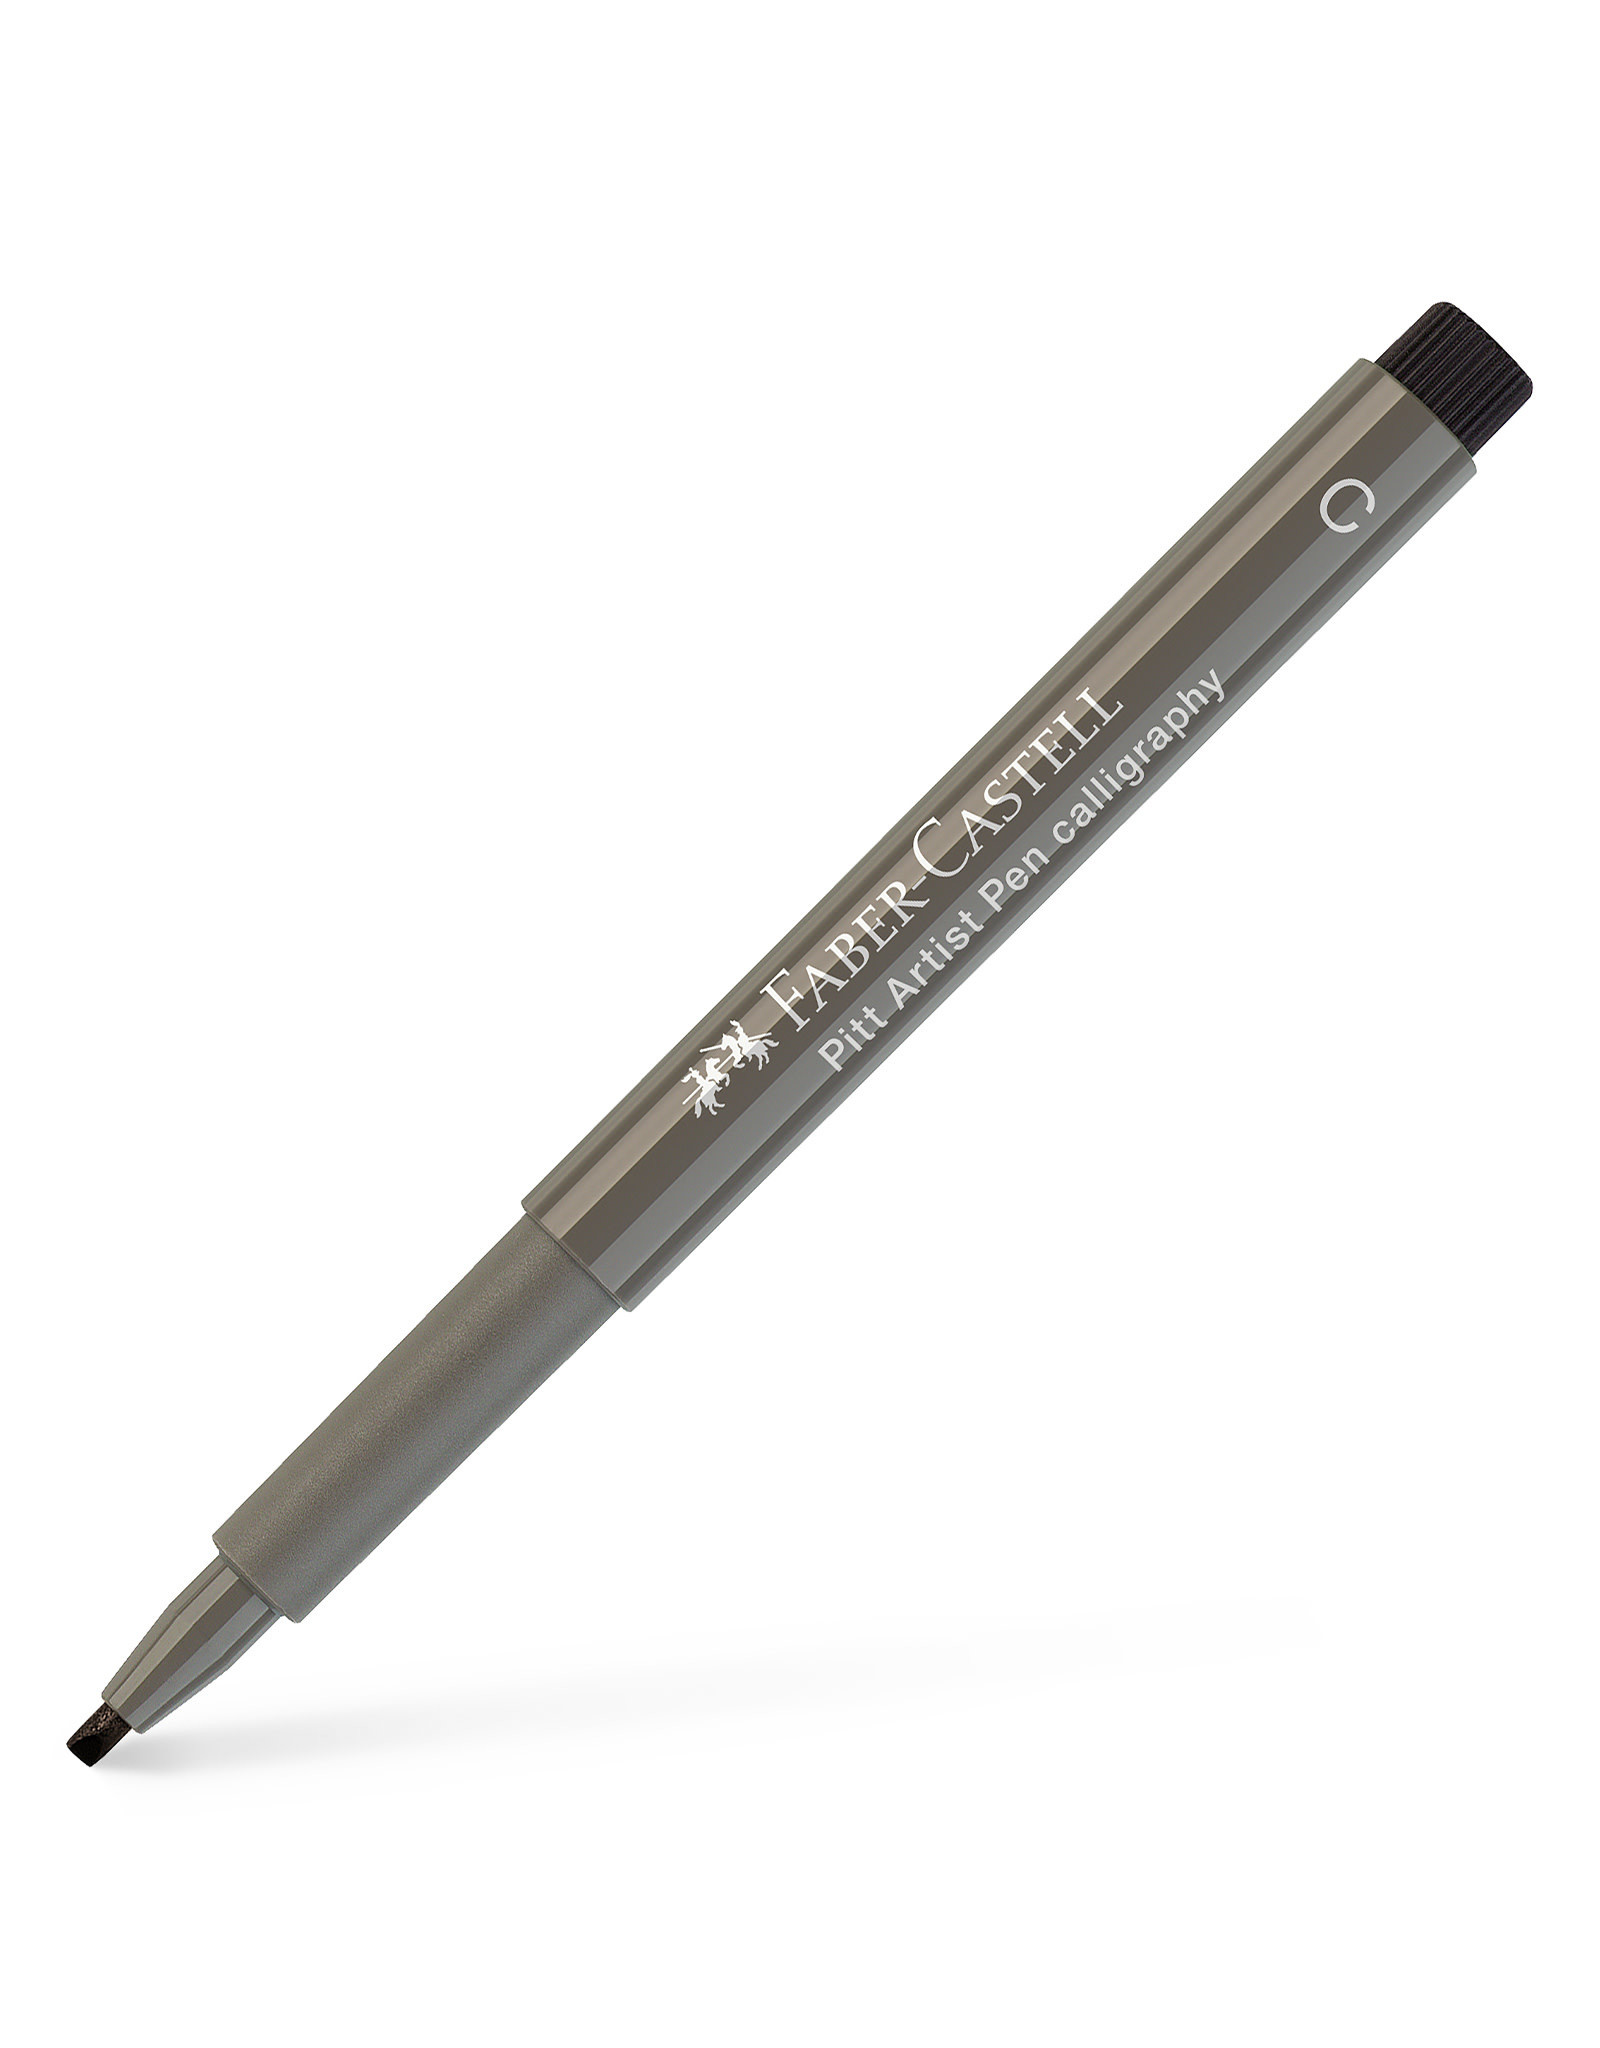 FABER-CASTELL Faber-Castell Calligraphy Pen, Warm Grey IV